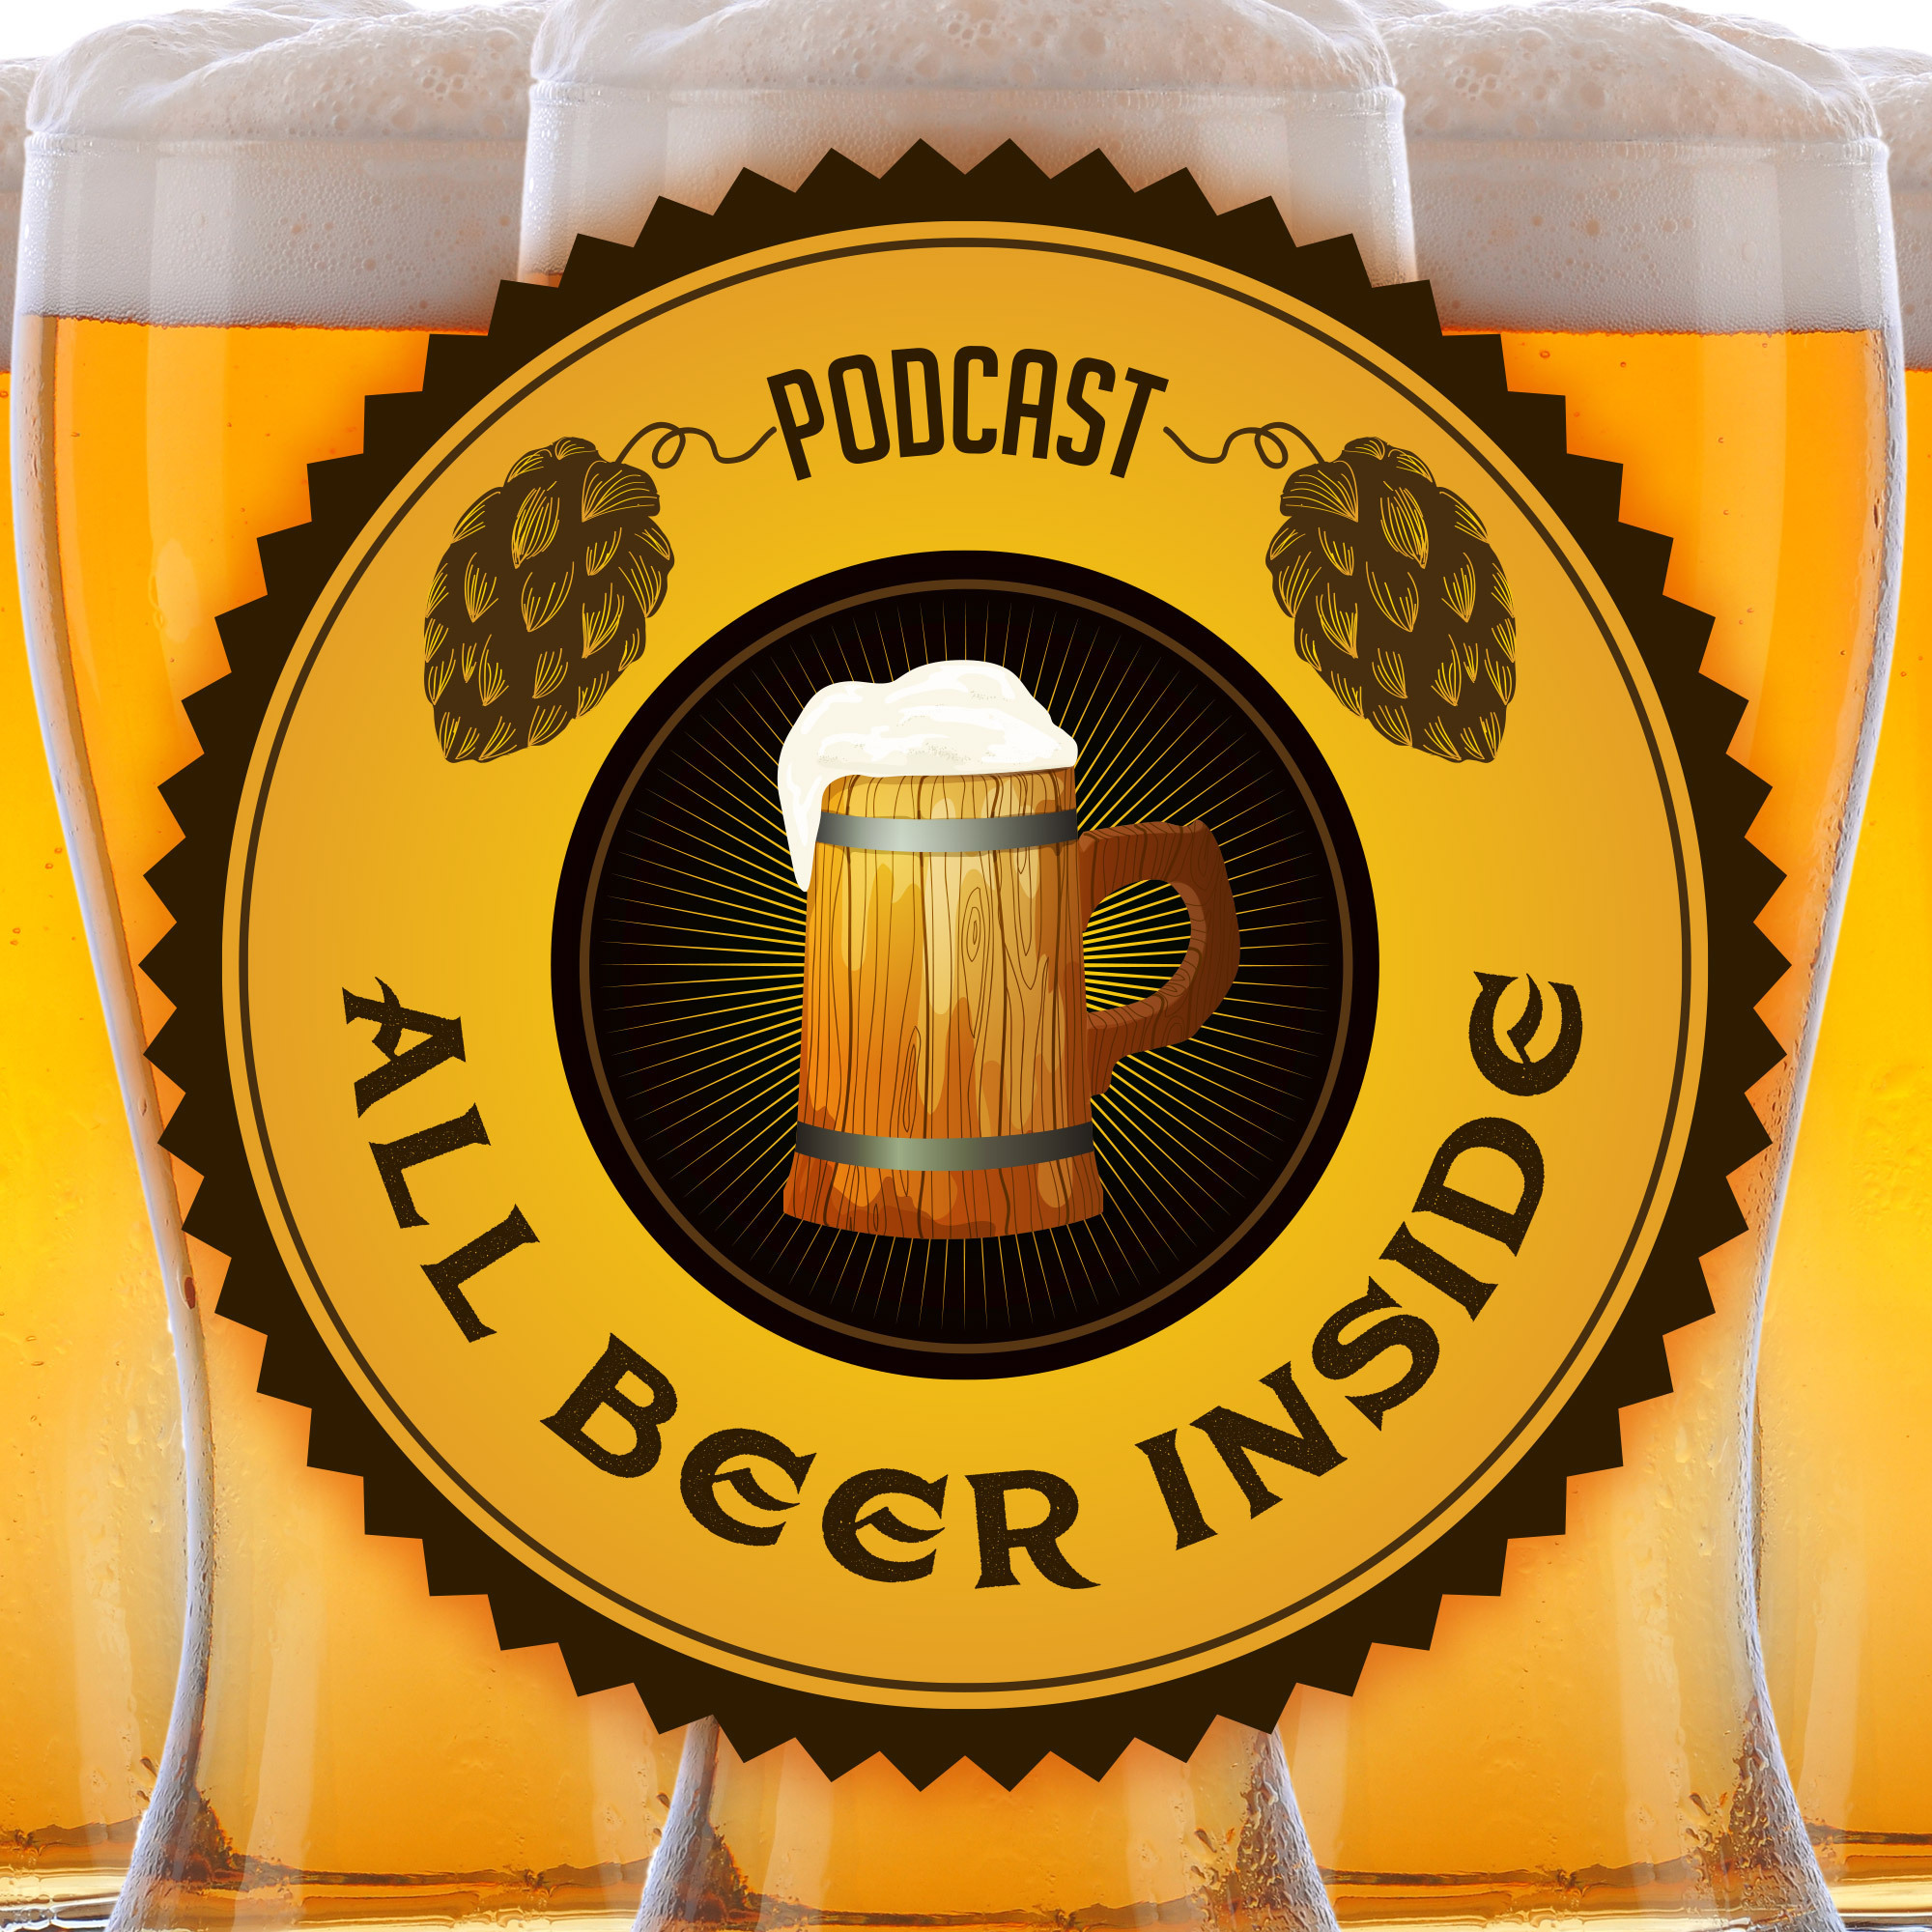 All Beer Inside Episode 39 Part 2 - I am White and Stuff